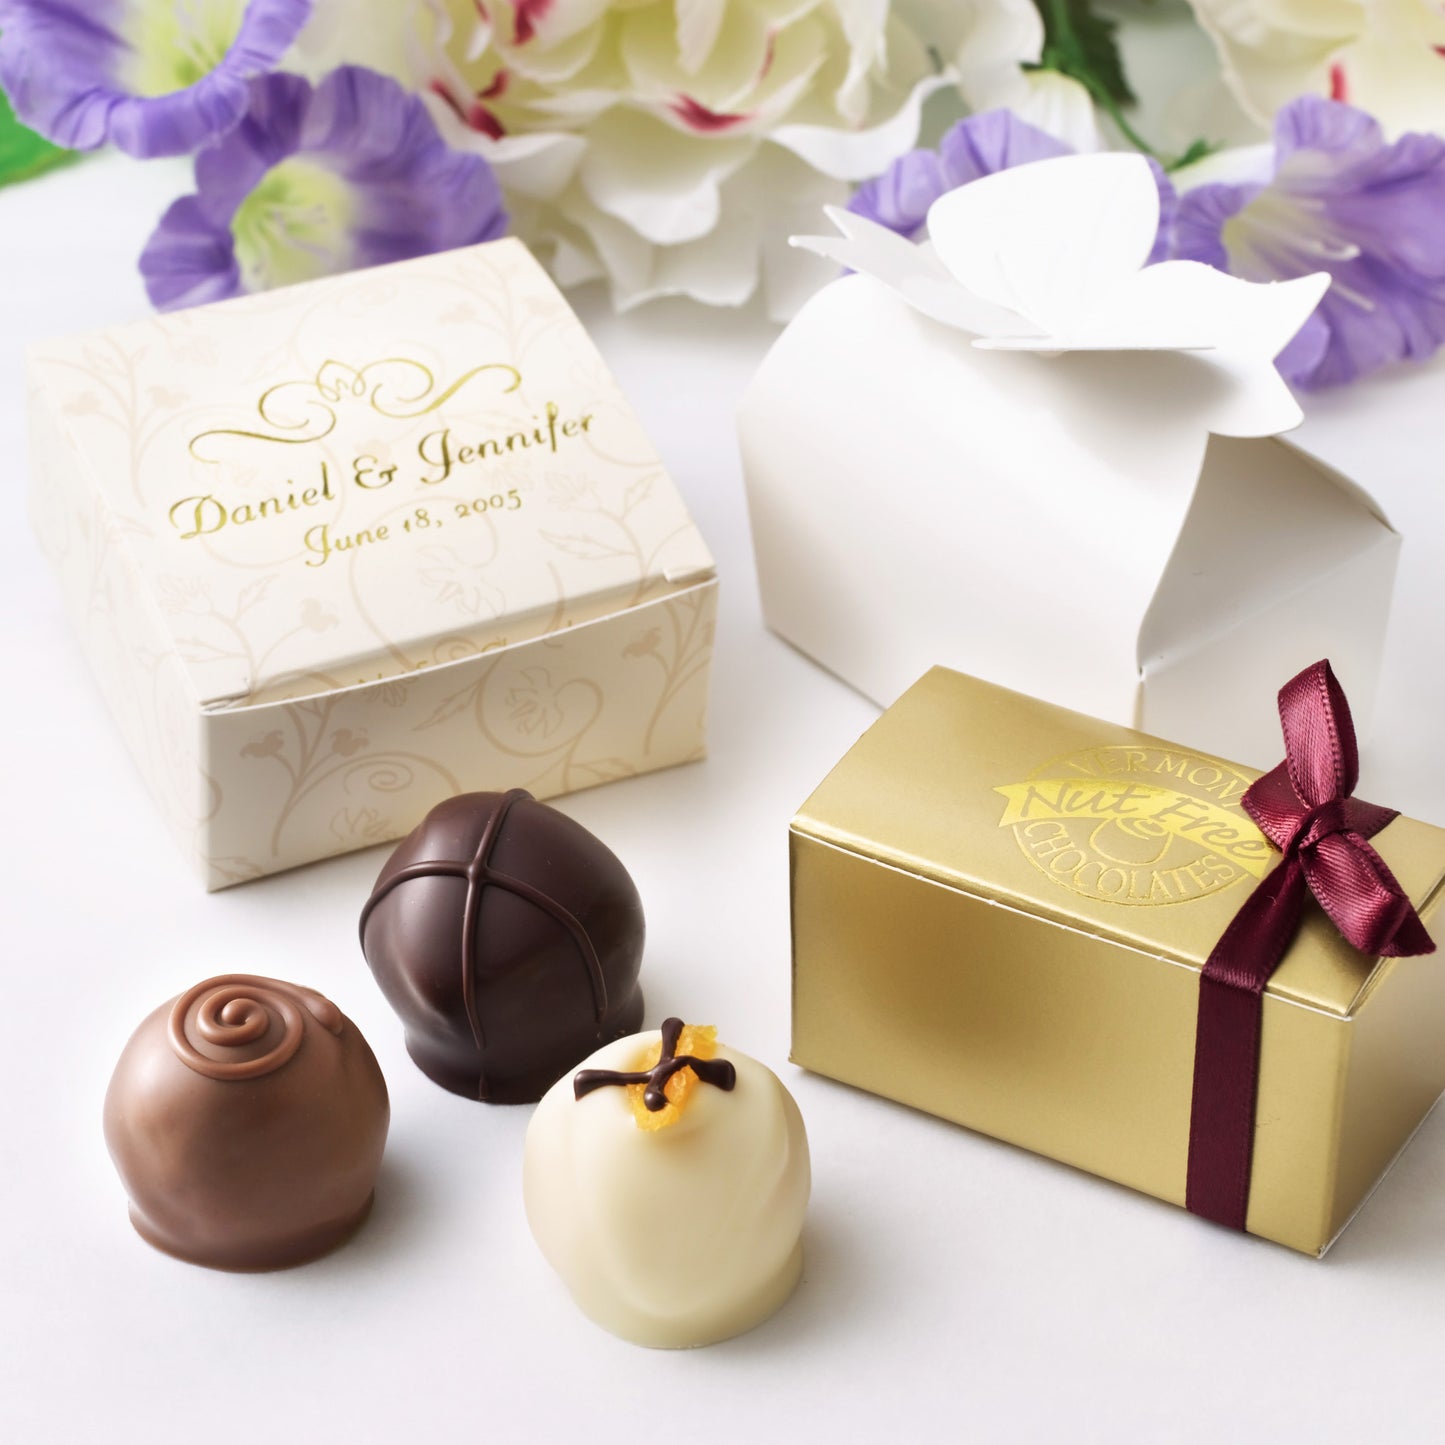 Truffles in front of small cardboard boxes, some of which are engraved with names